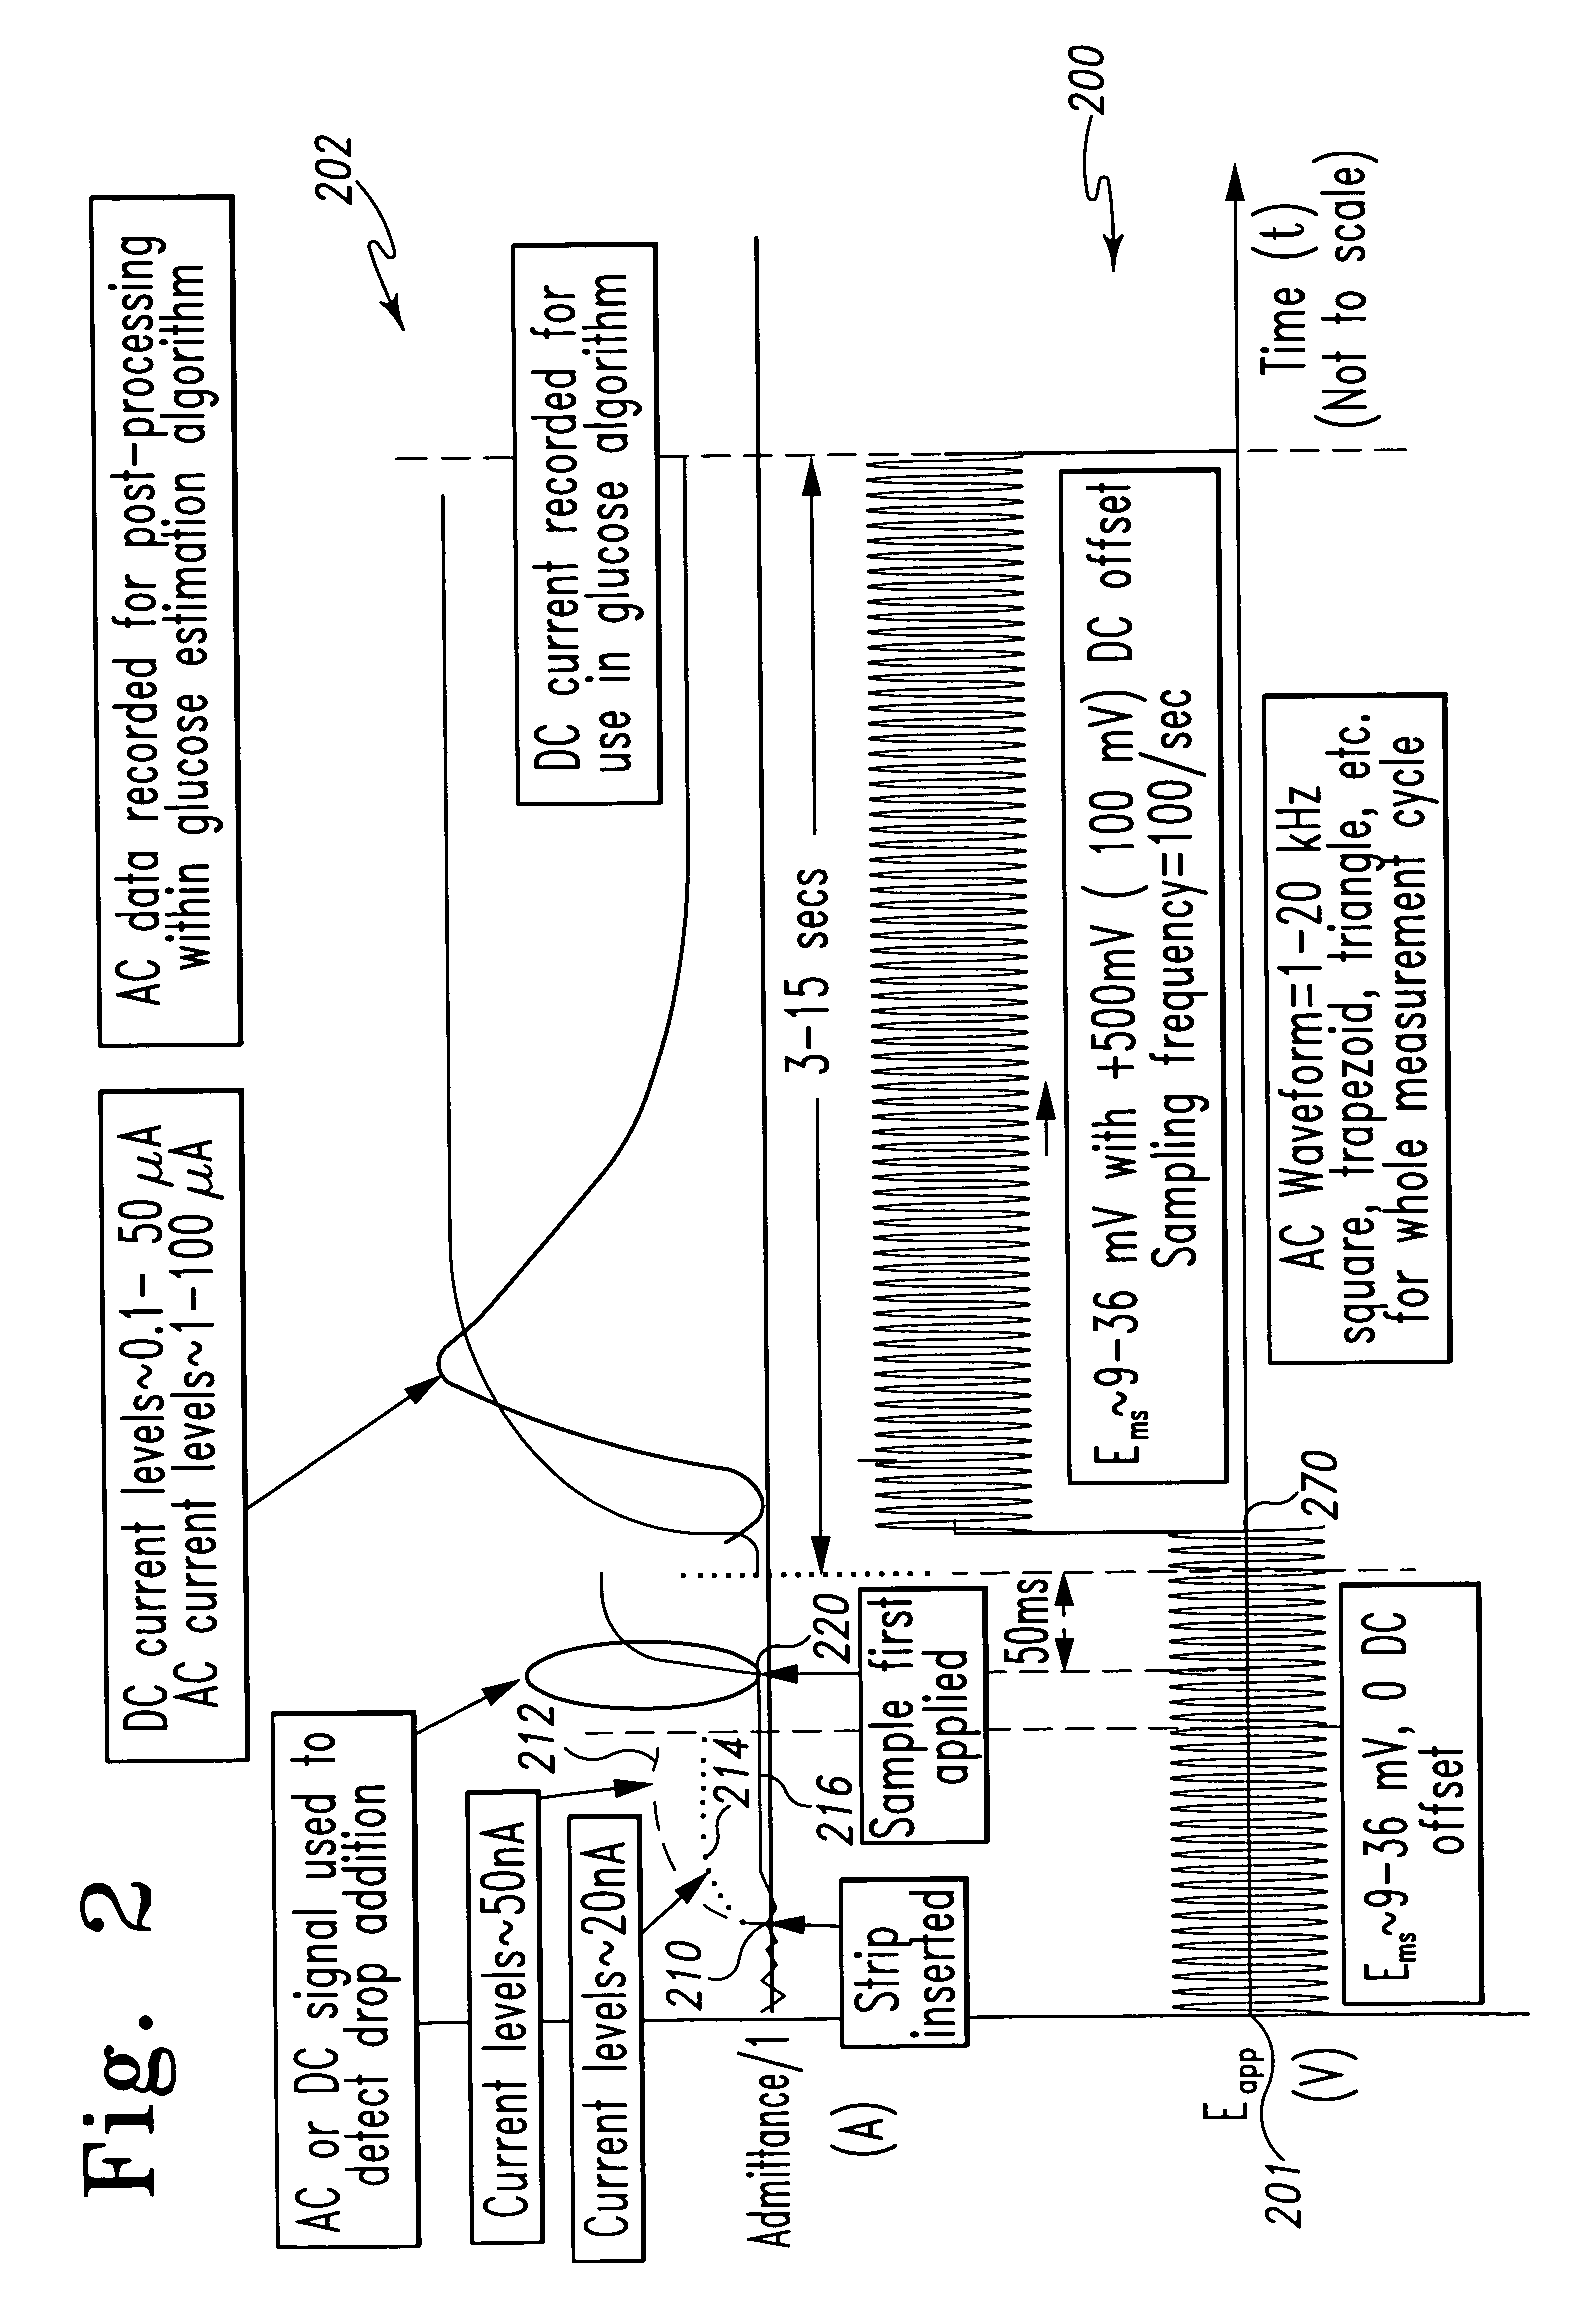 System and method for analyte measurement using dose sufficiency electrodes